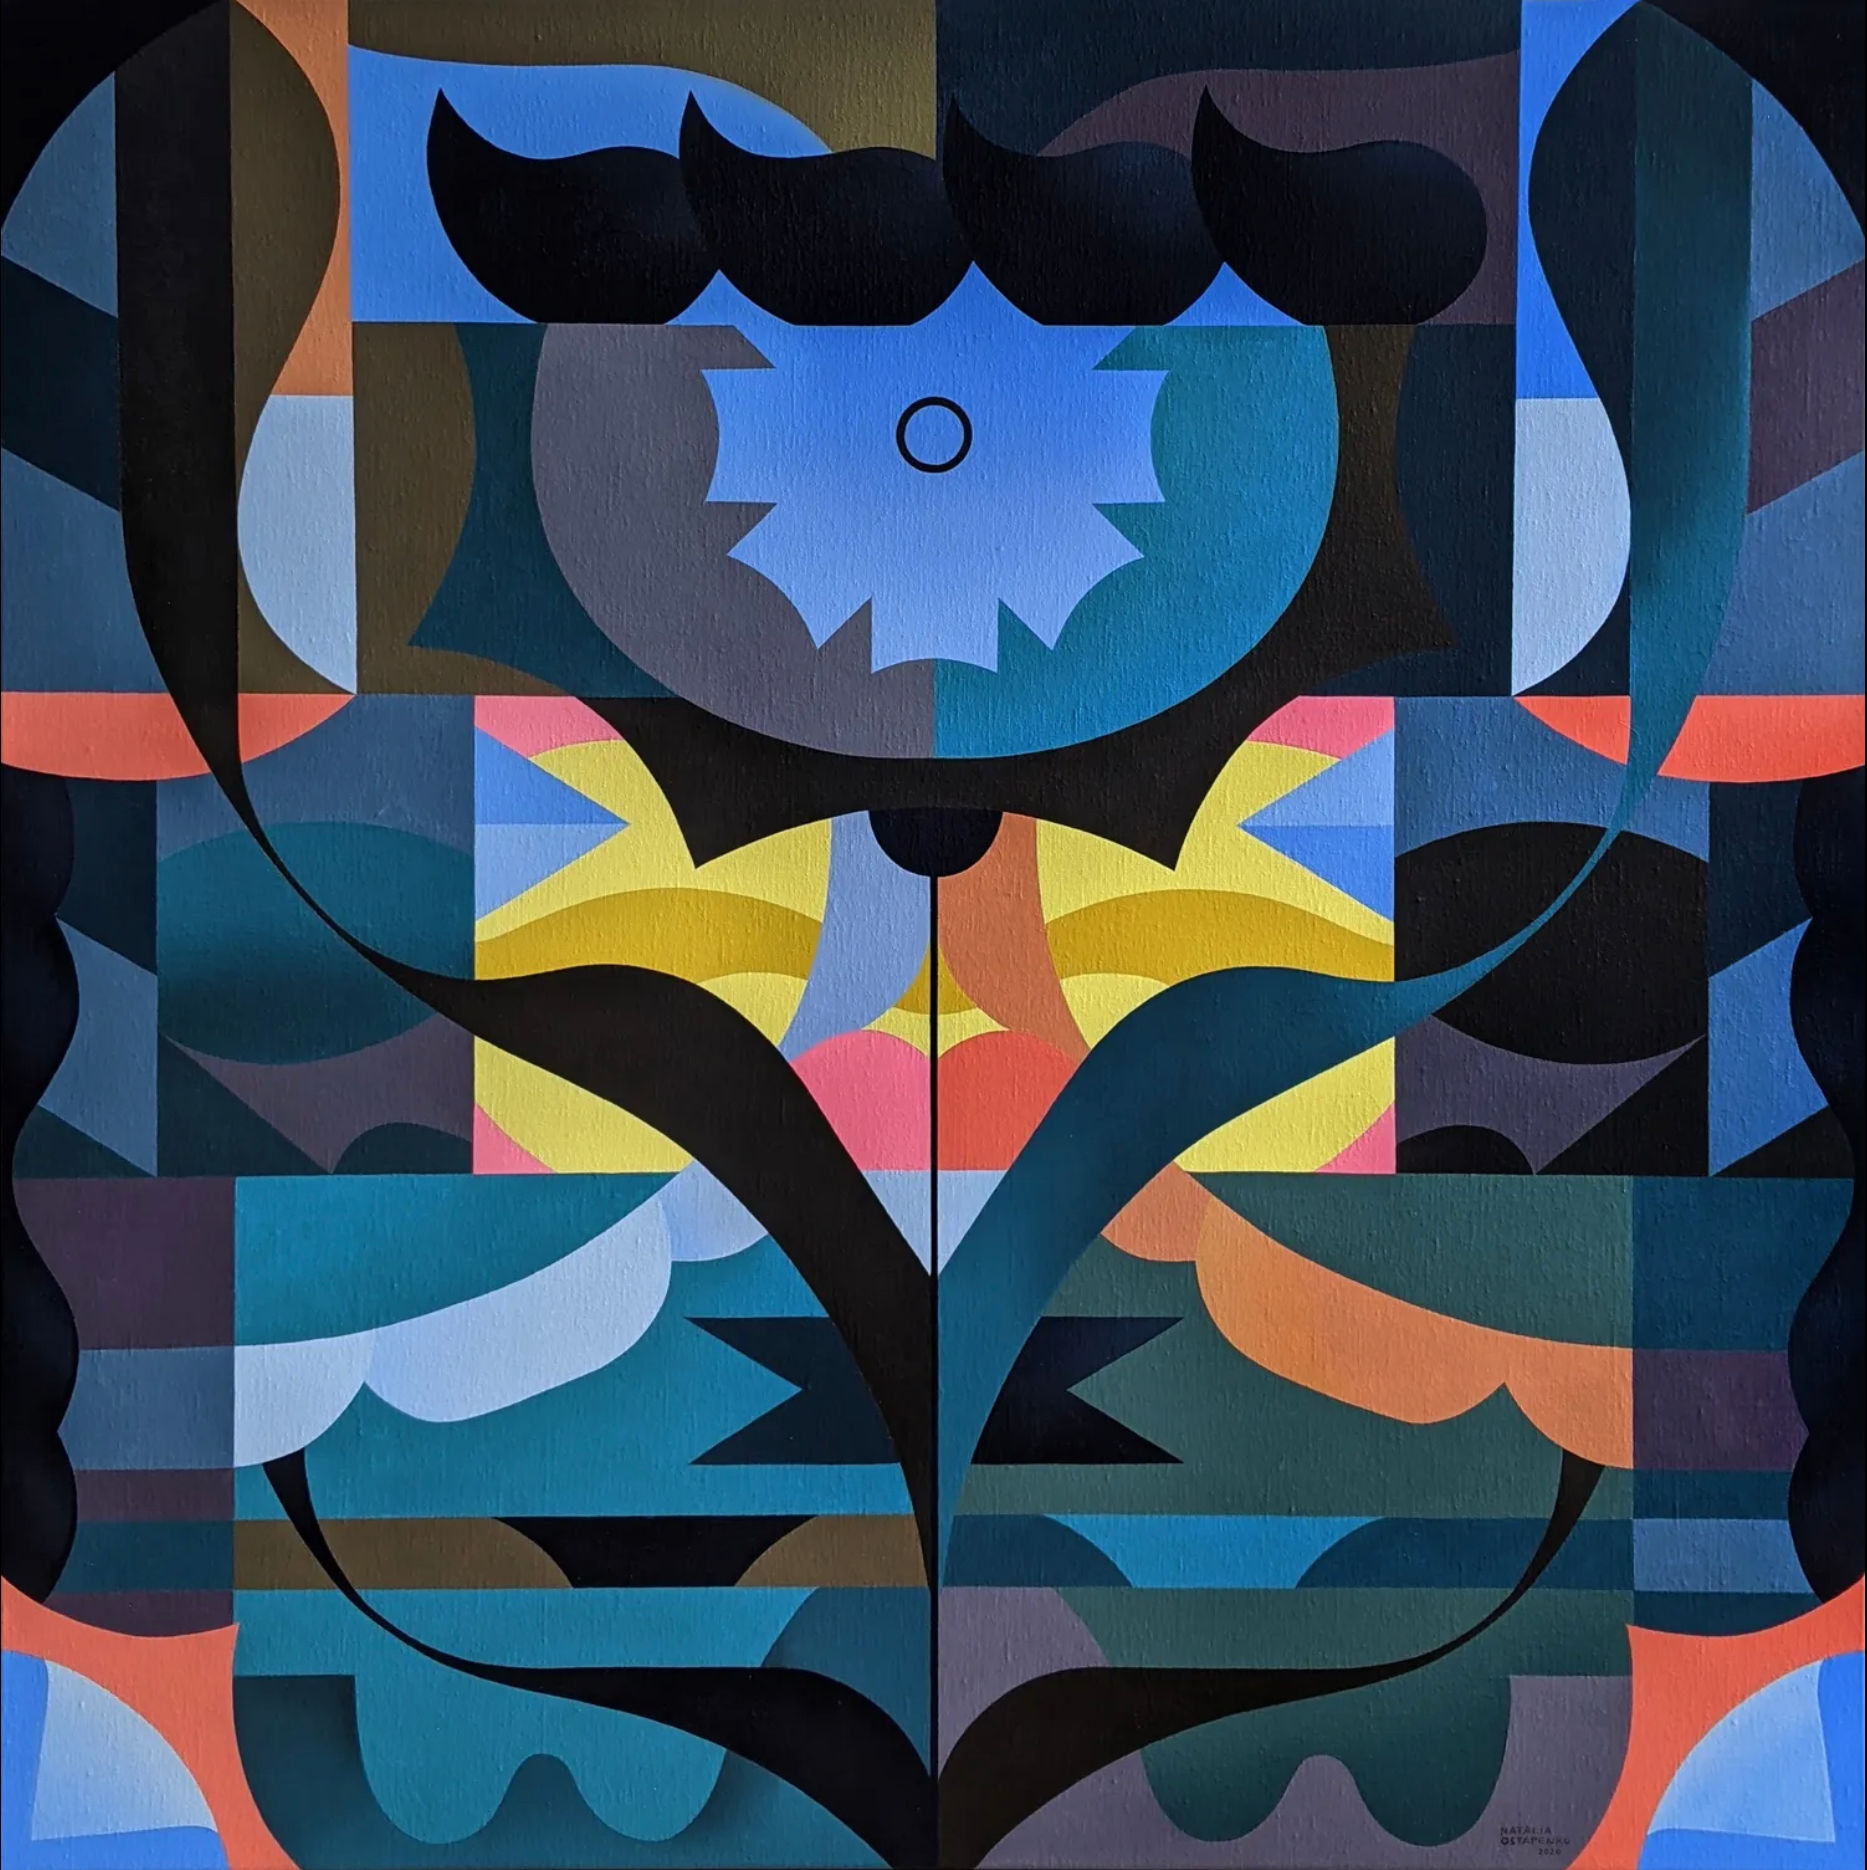 11 Geometric Abstract Works with Striking Compositions | The Artling